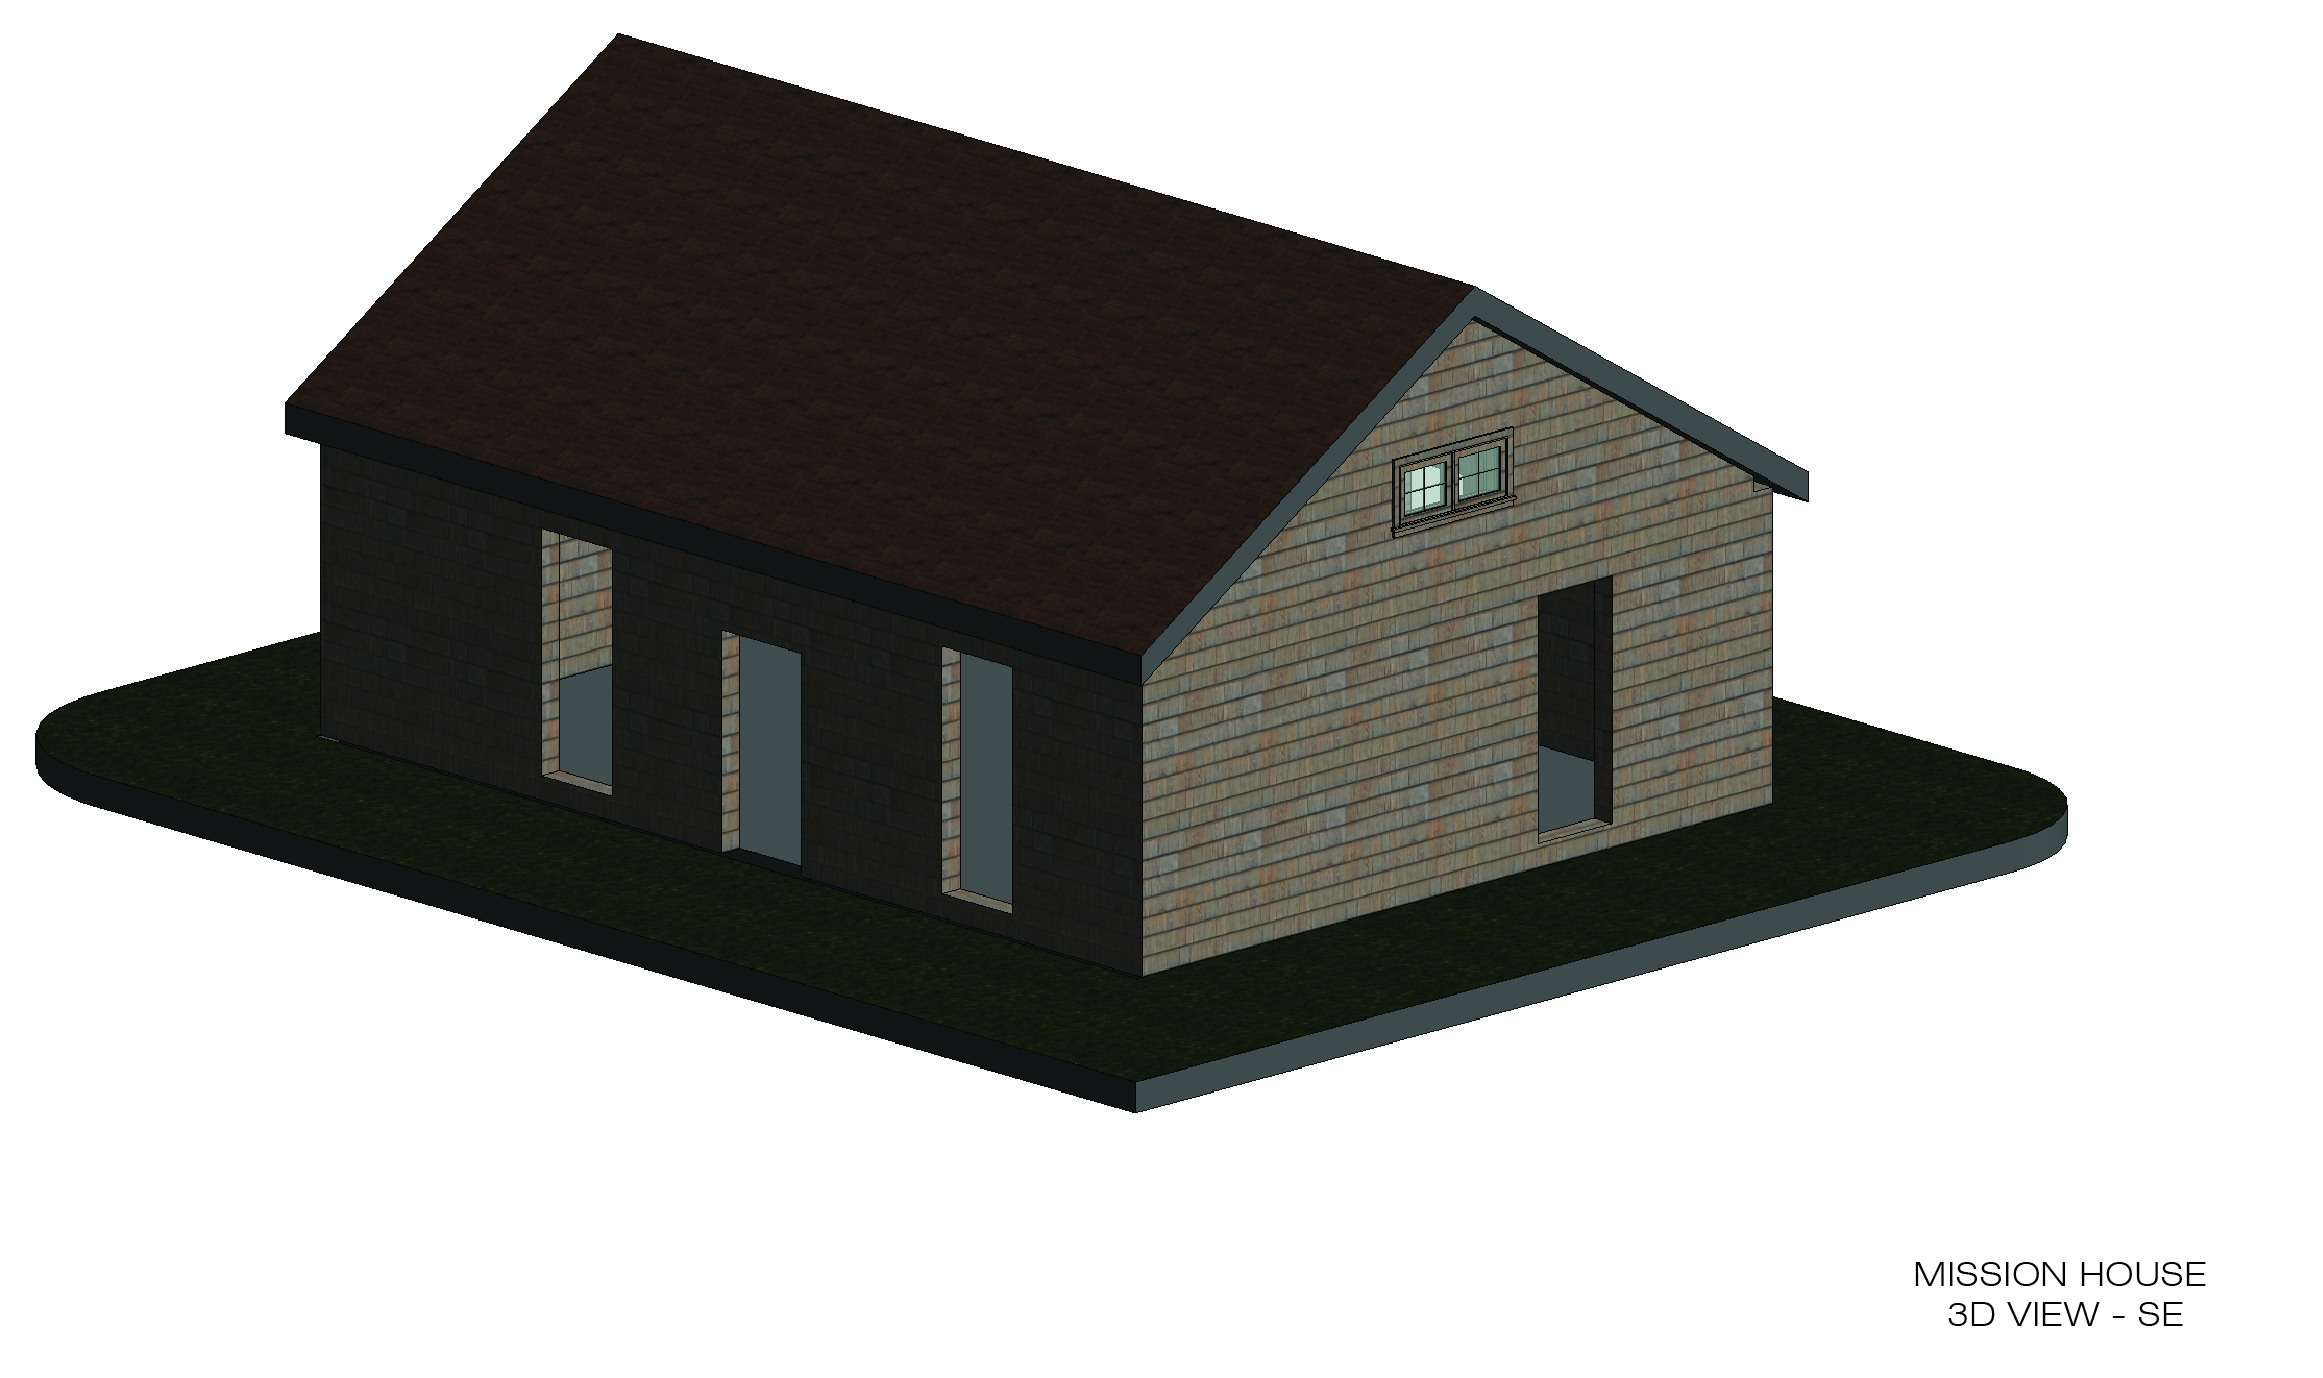 3D view of the southeast corner of the Anglican Mission House